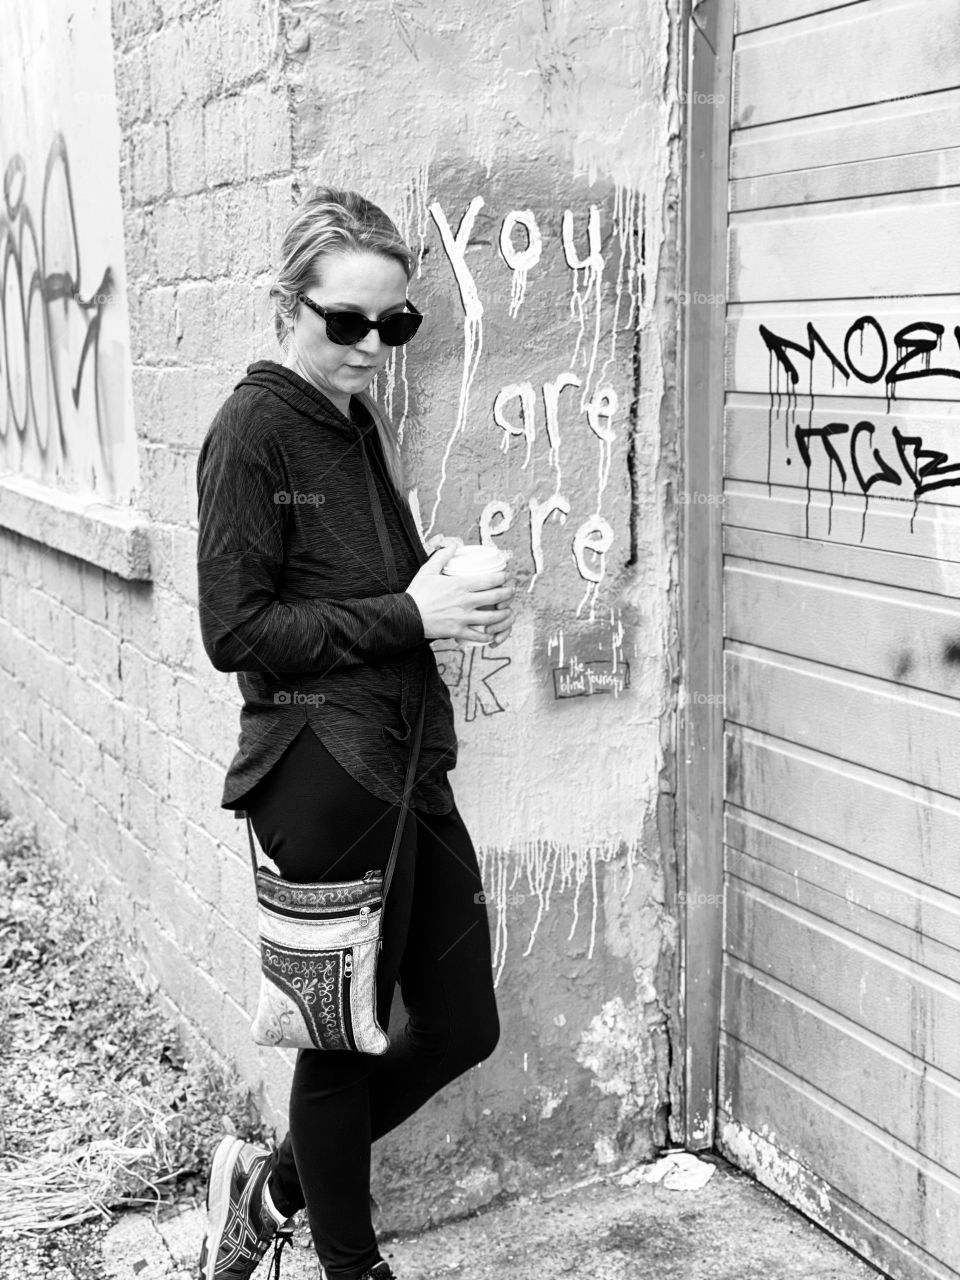 City alleys, graffiti, and coffee